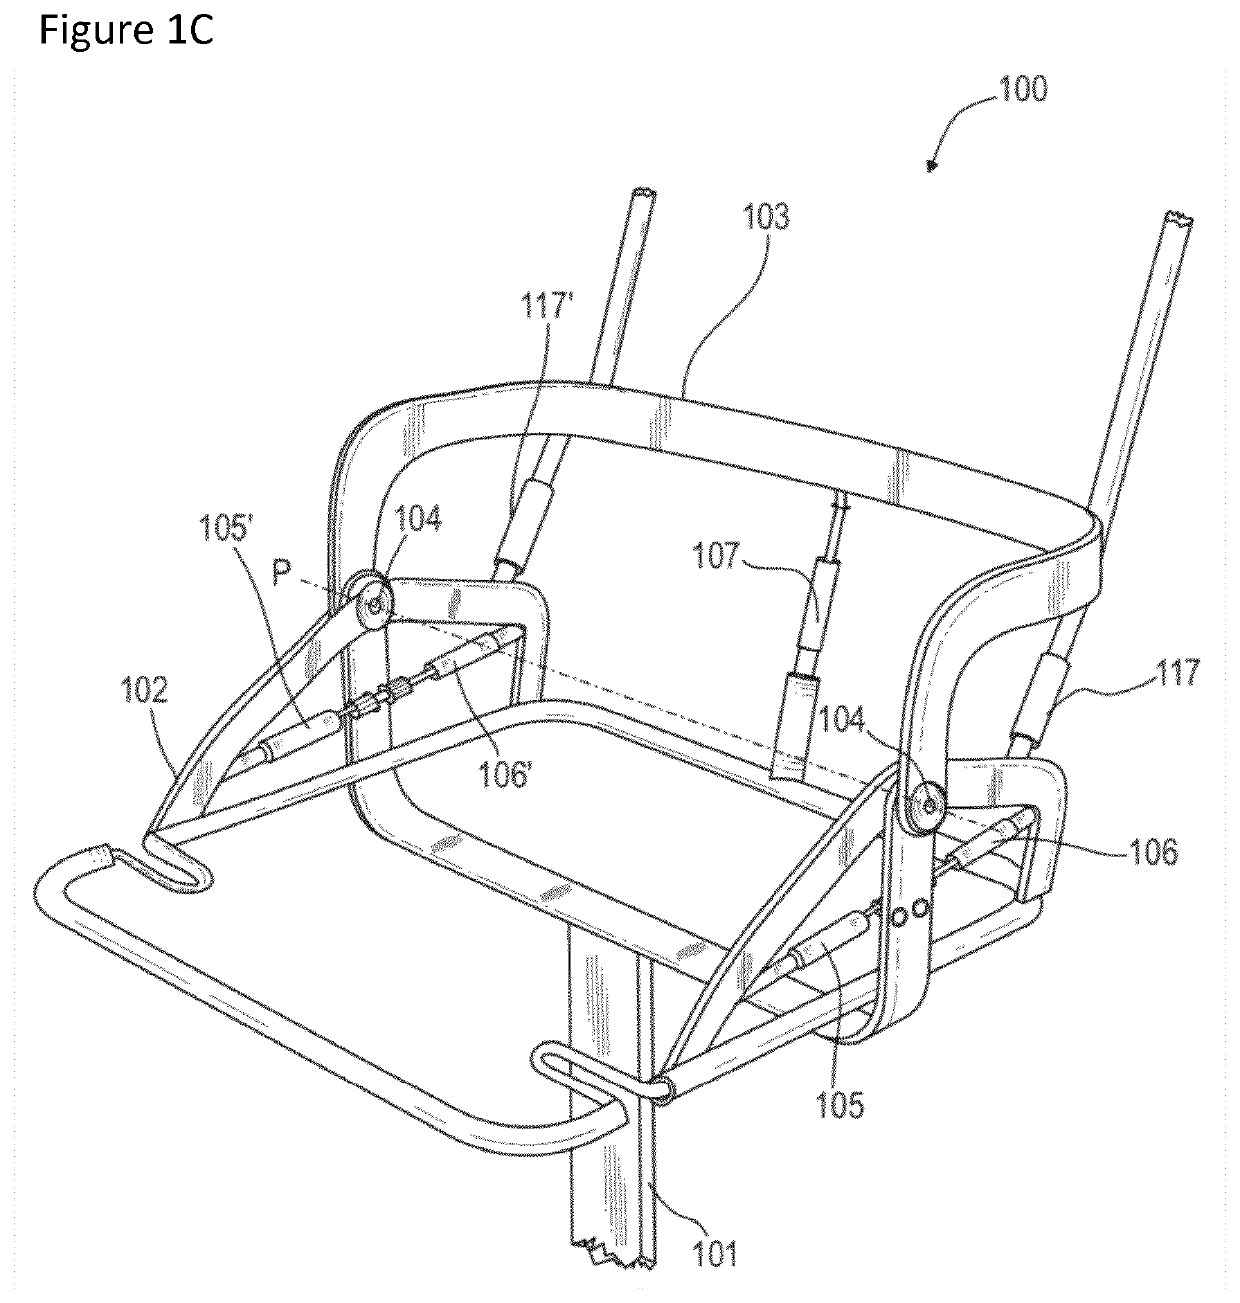 Seating assembly for improved seating, ergonomic chairs or wheelchairs